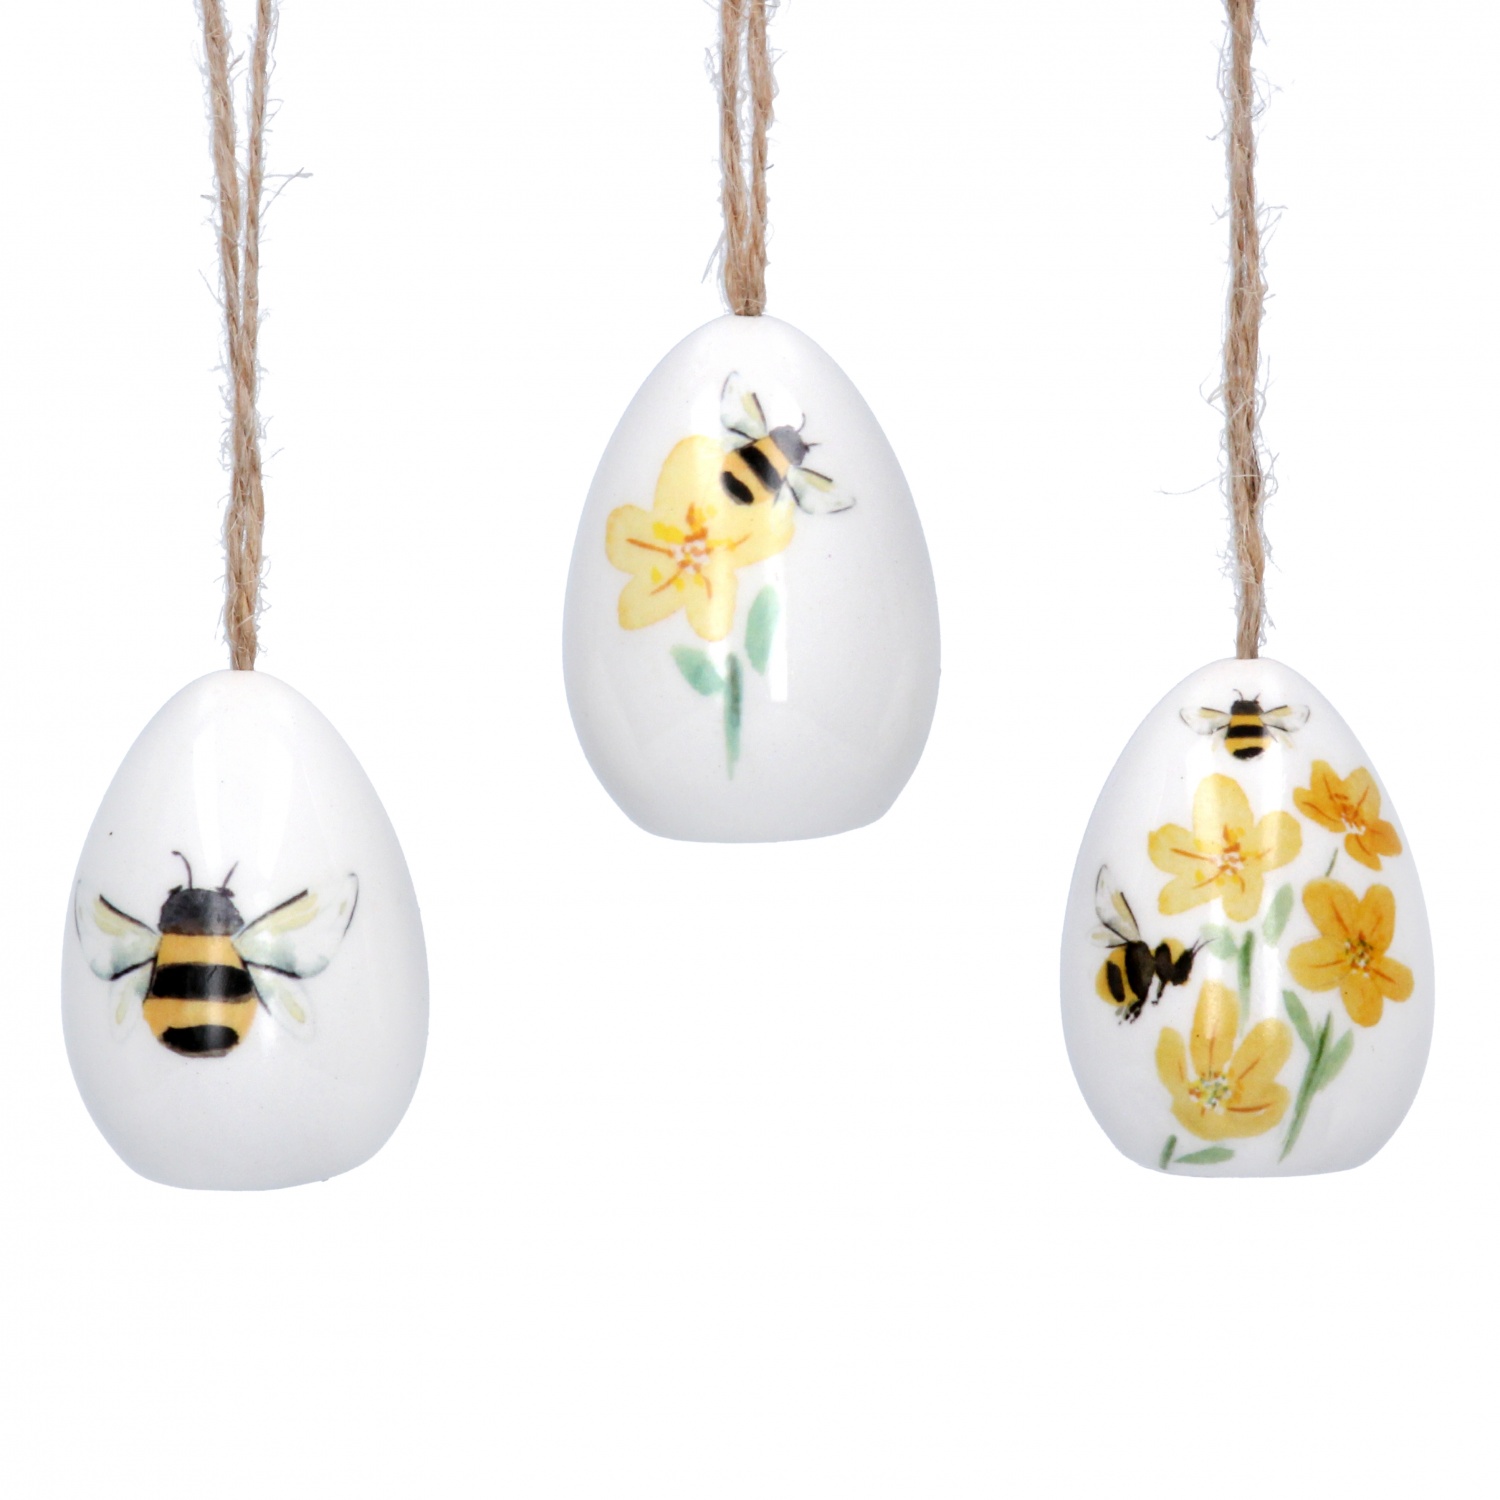 Gisela Graham Easter Decorations - 3 Ceramic Bee & Floral Decorations